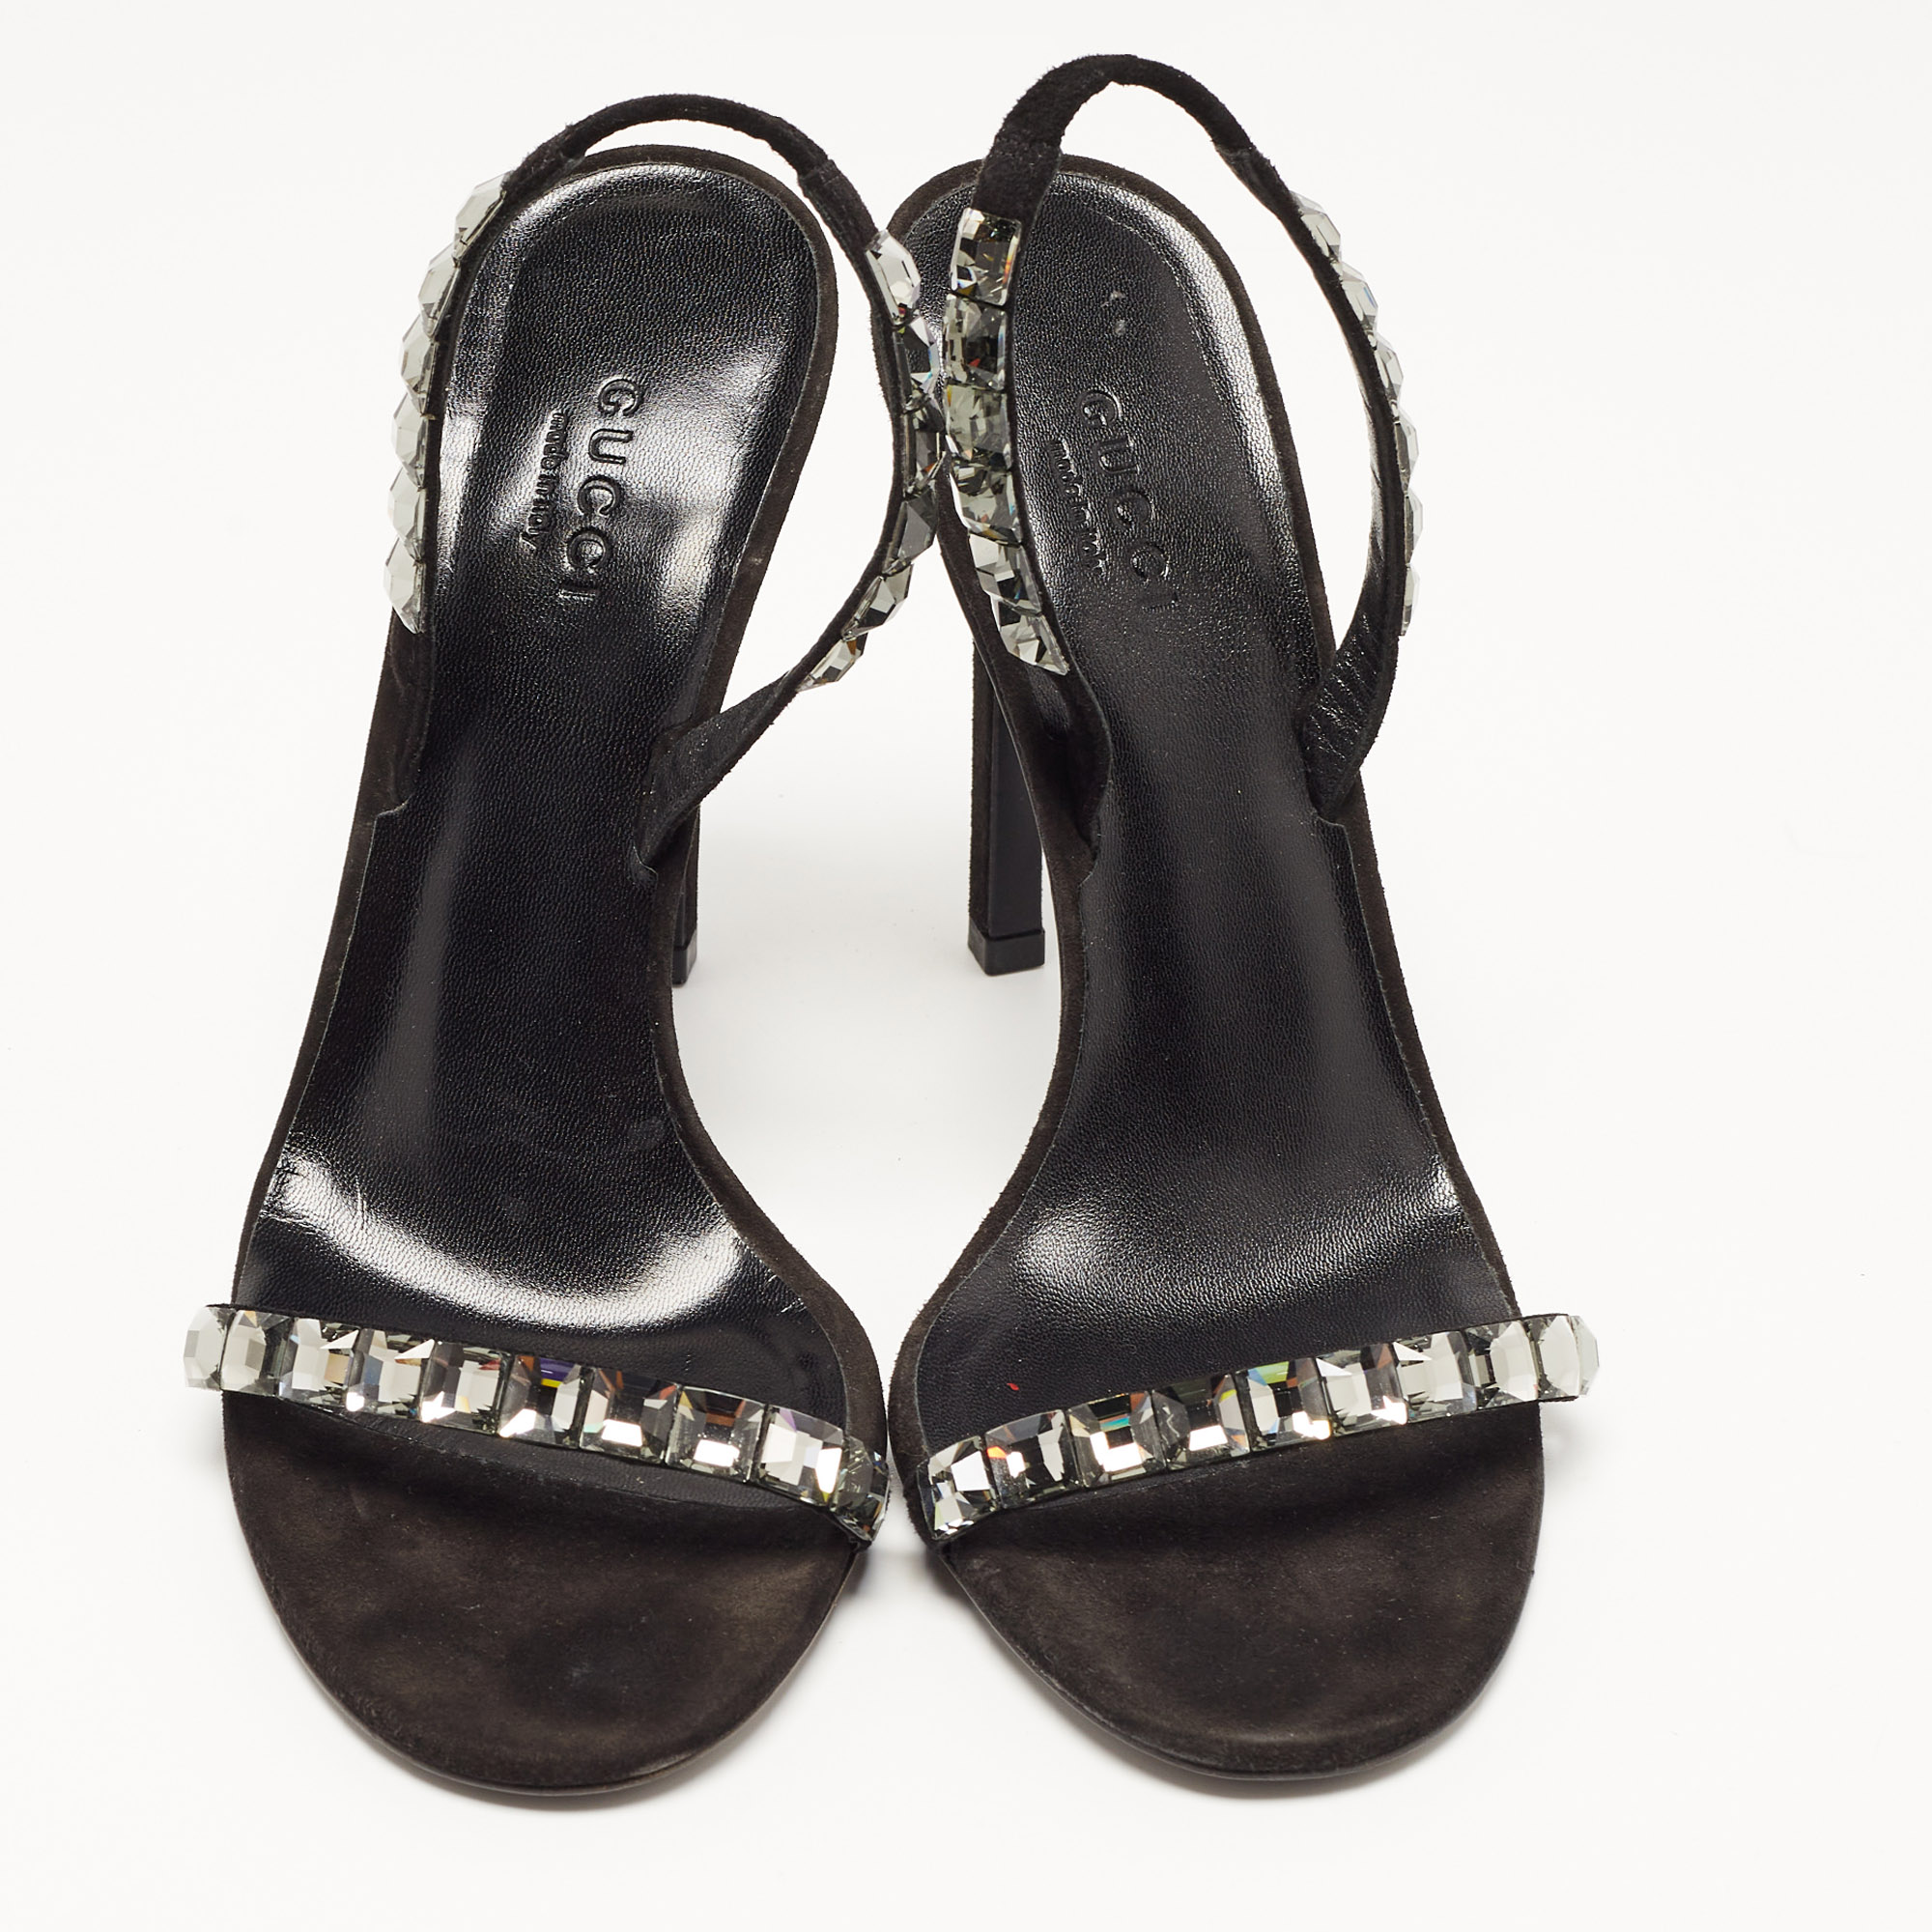 Gucci Black Suede Embellished Mallory Sandals Size 37